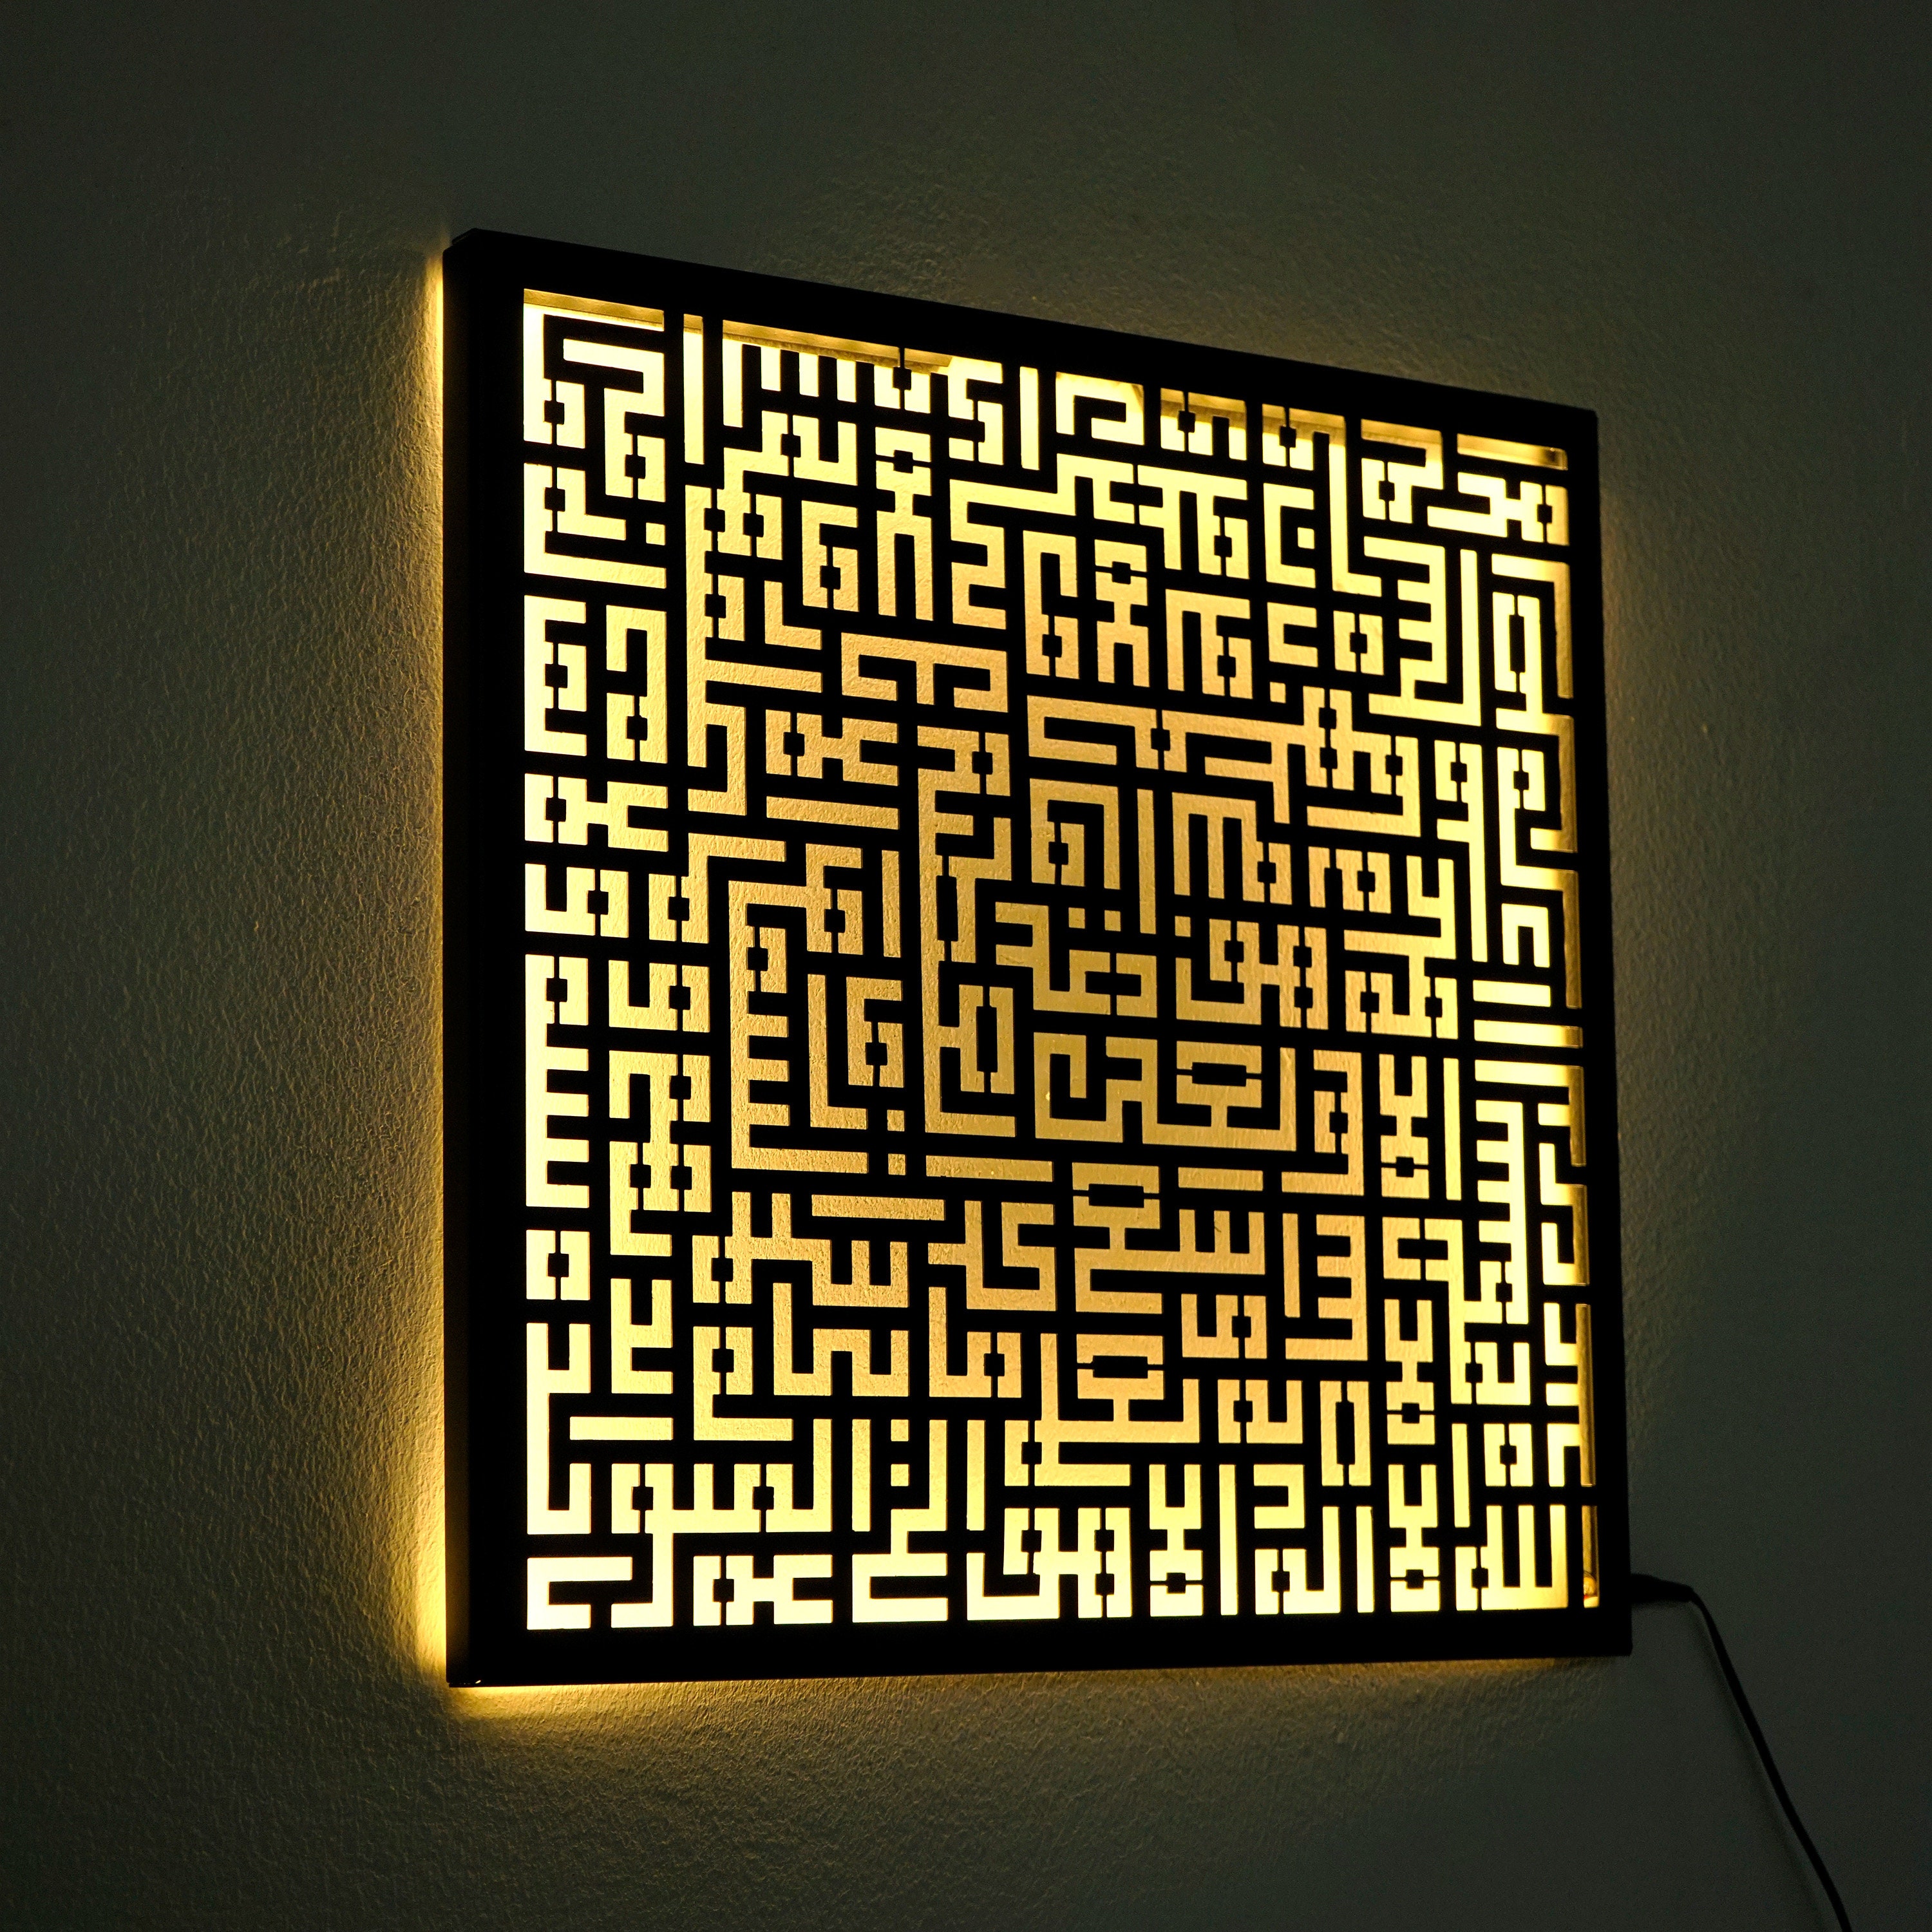 Islamic wall lights or lamps - laser cut pattern light shades, Steel a –  led-superart